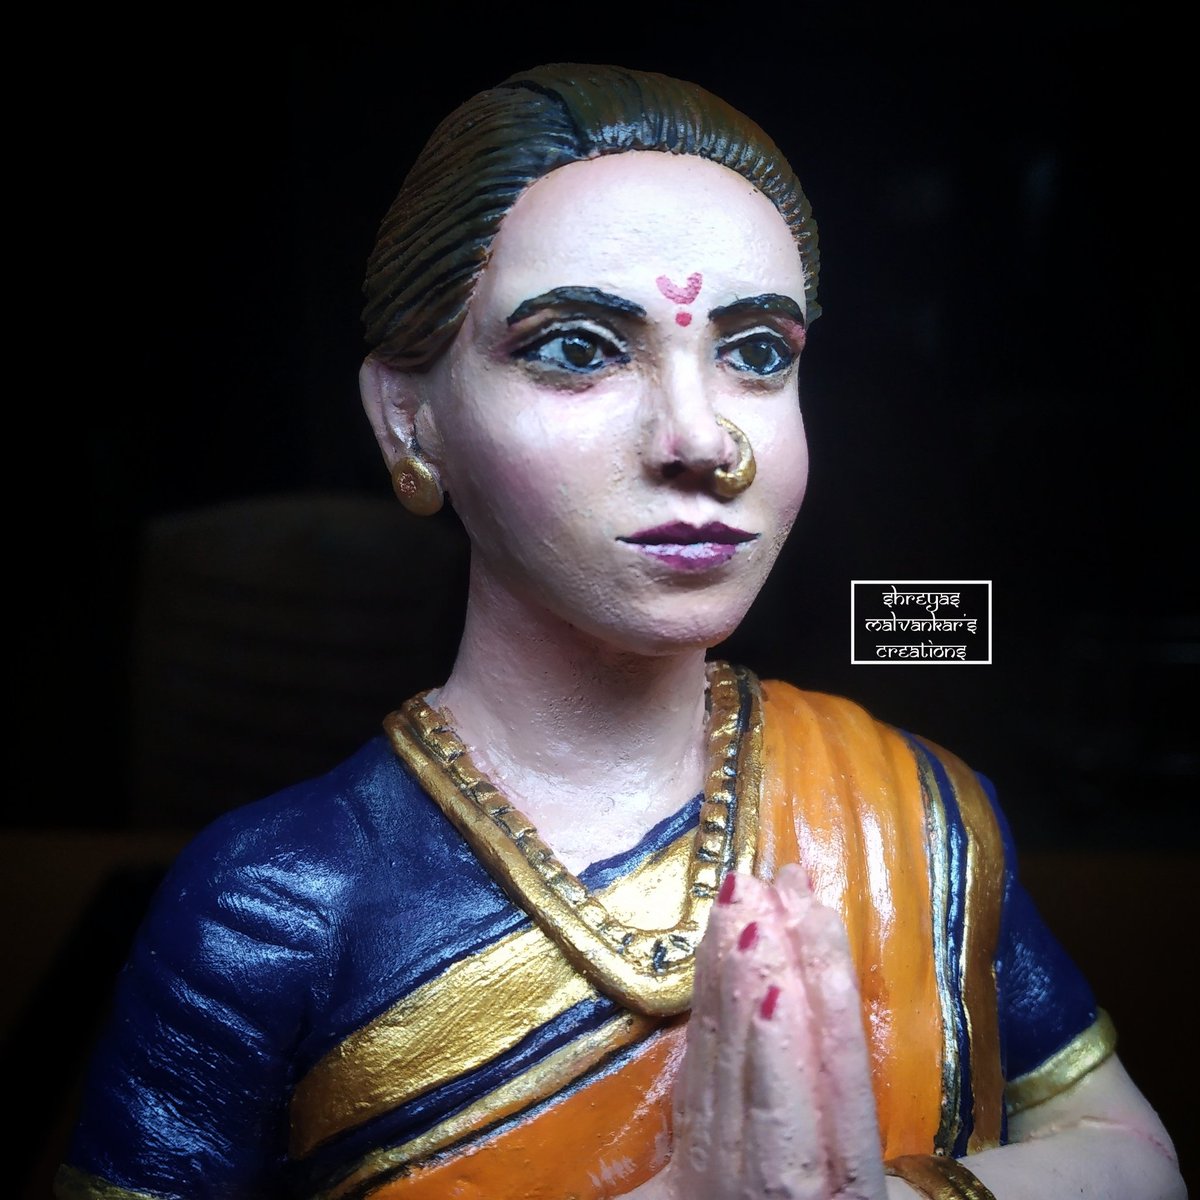 नमस्कार 🙏🏻
#prototype #smmcreations #handmade #homedecor #idol #handcrafted #traditional #india #indian #saree #indianartists #sculpture #indiansculpture #facesculpt #statue #indiaart #artist #handmadedecor #handmadedolls #handmadedecorations #maquette #femalestatue #woman